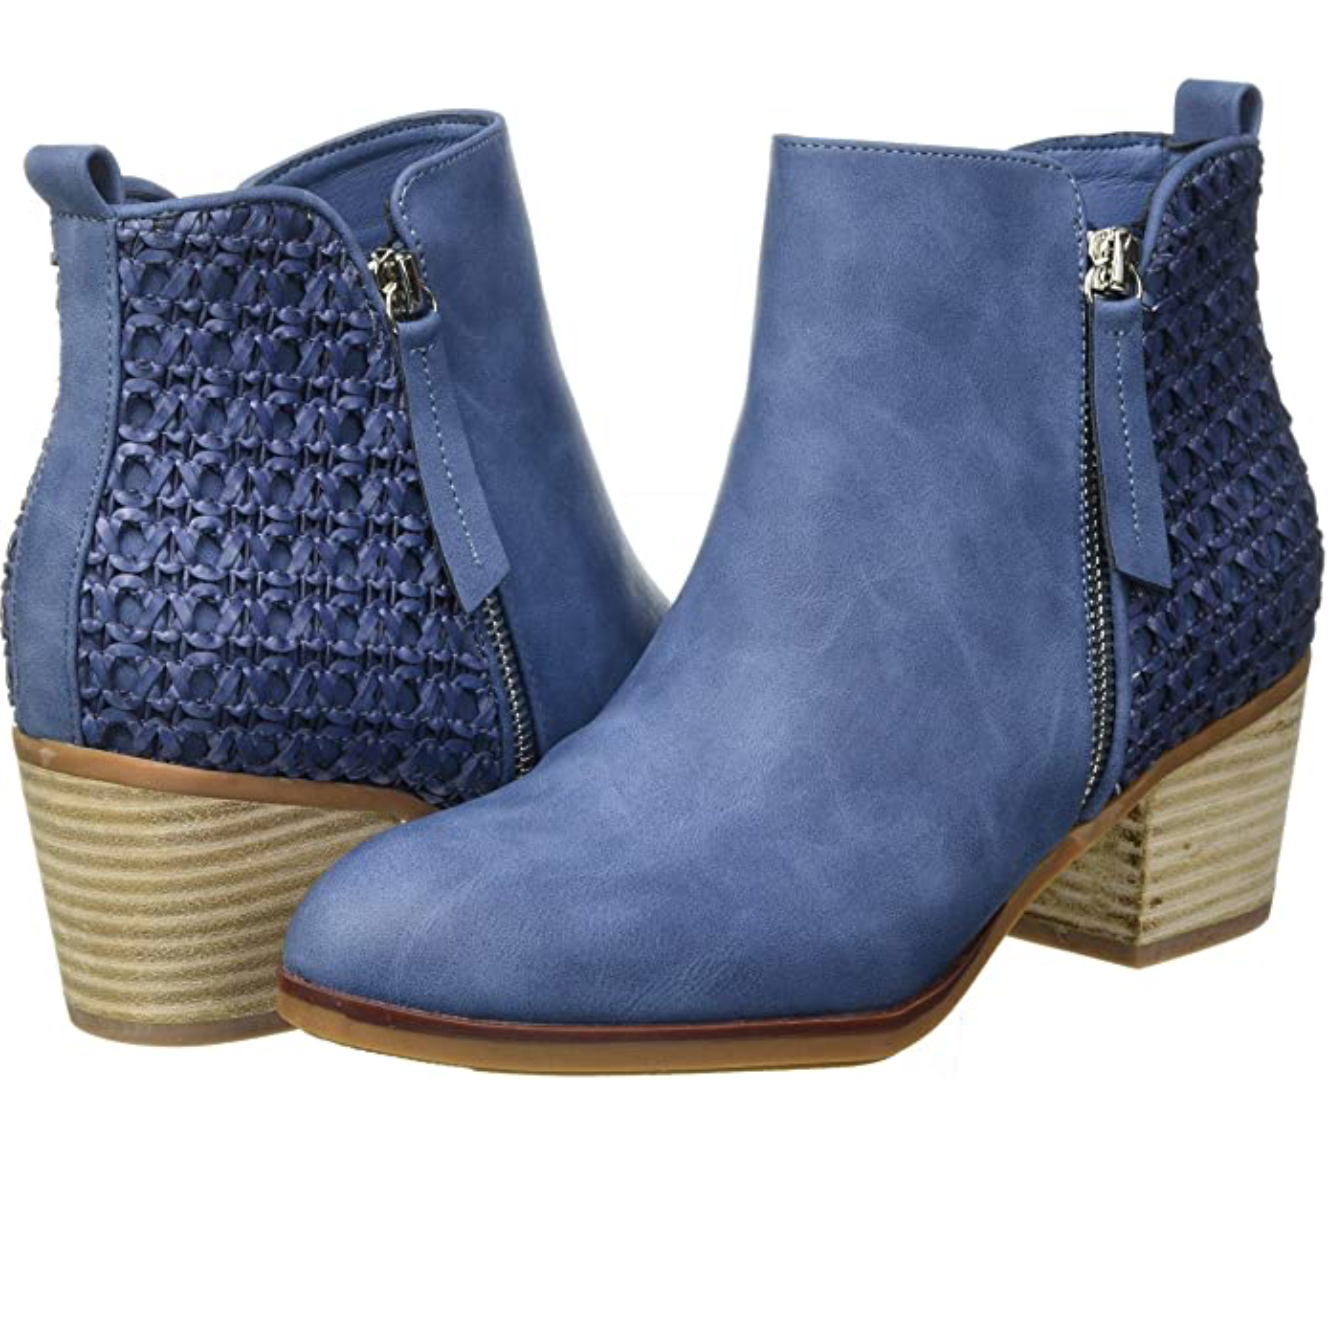 XTI - 42371 - Women's Ankle Boot - Blue - The Foot Factory